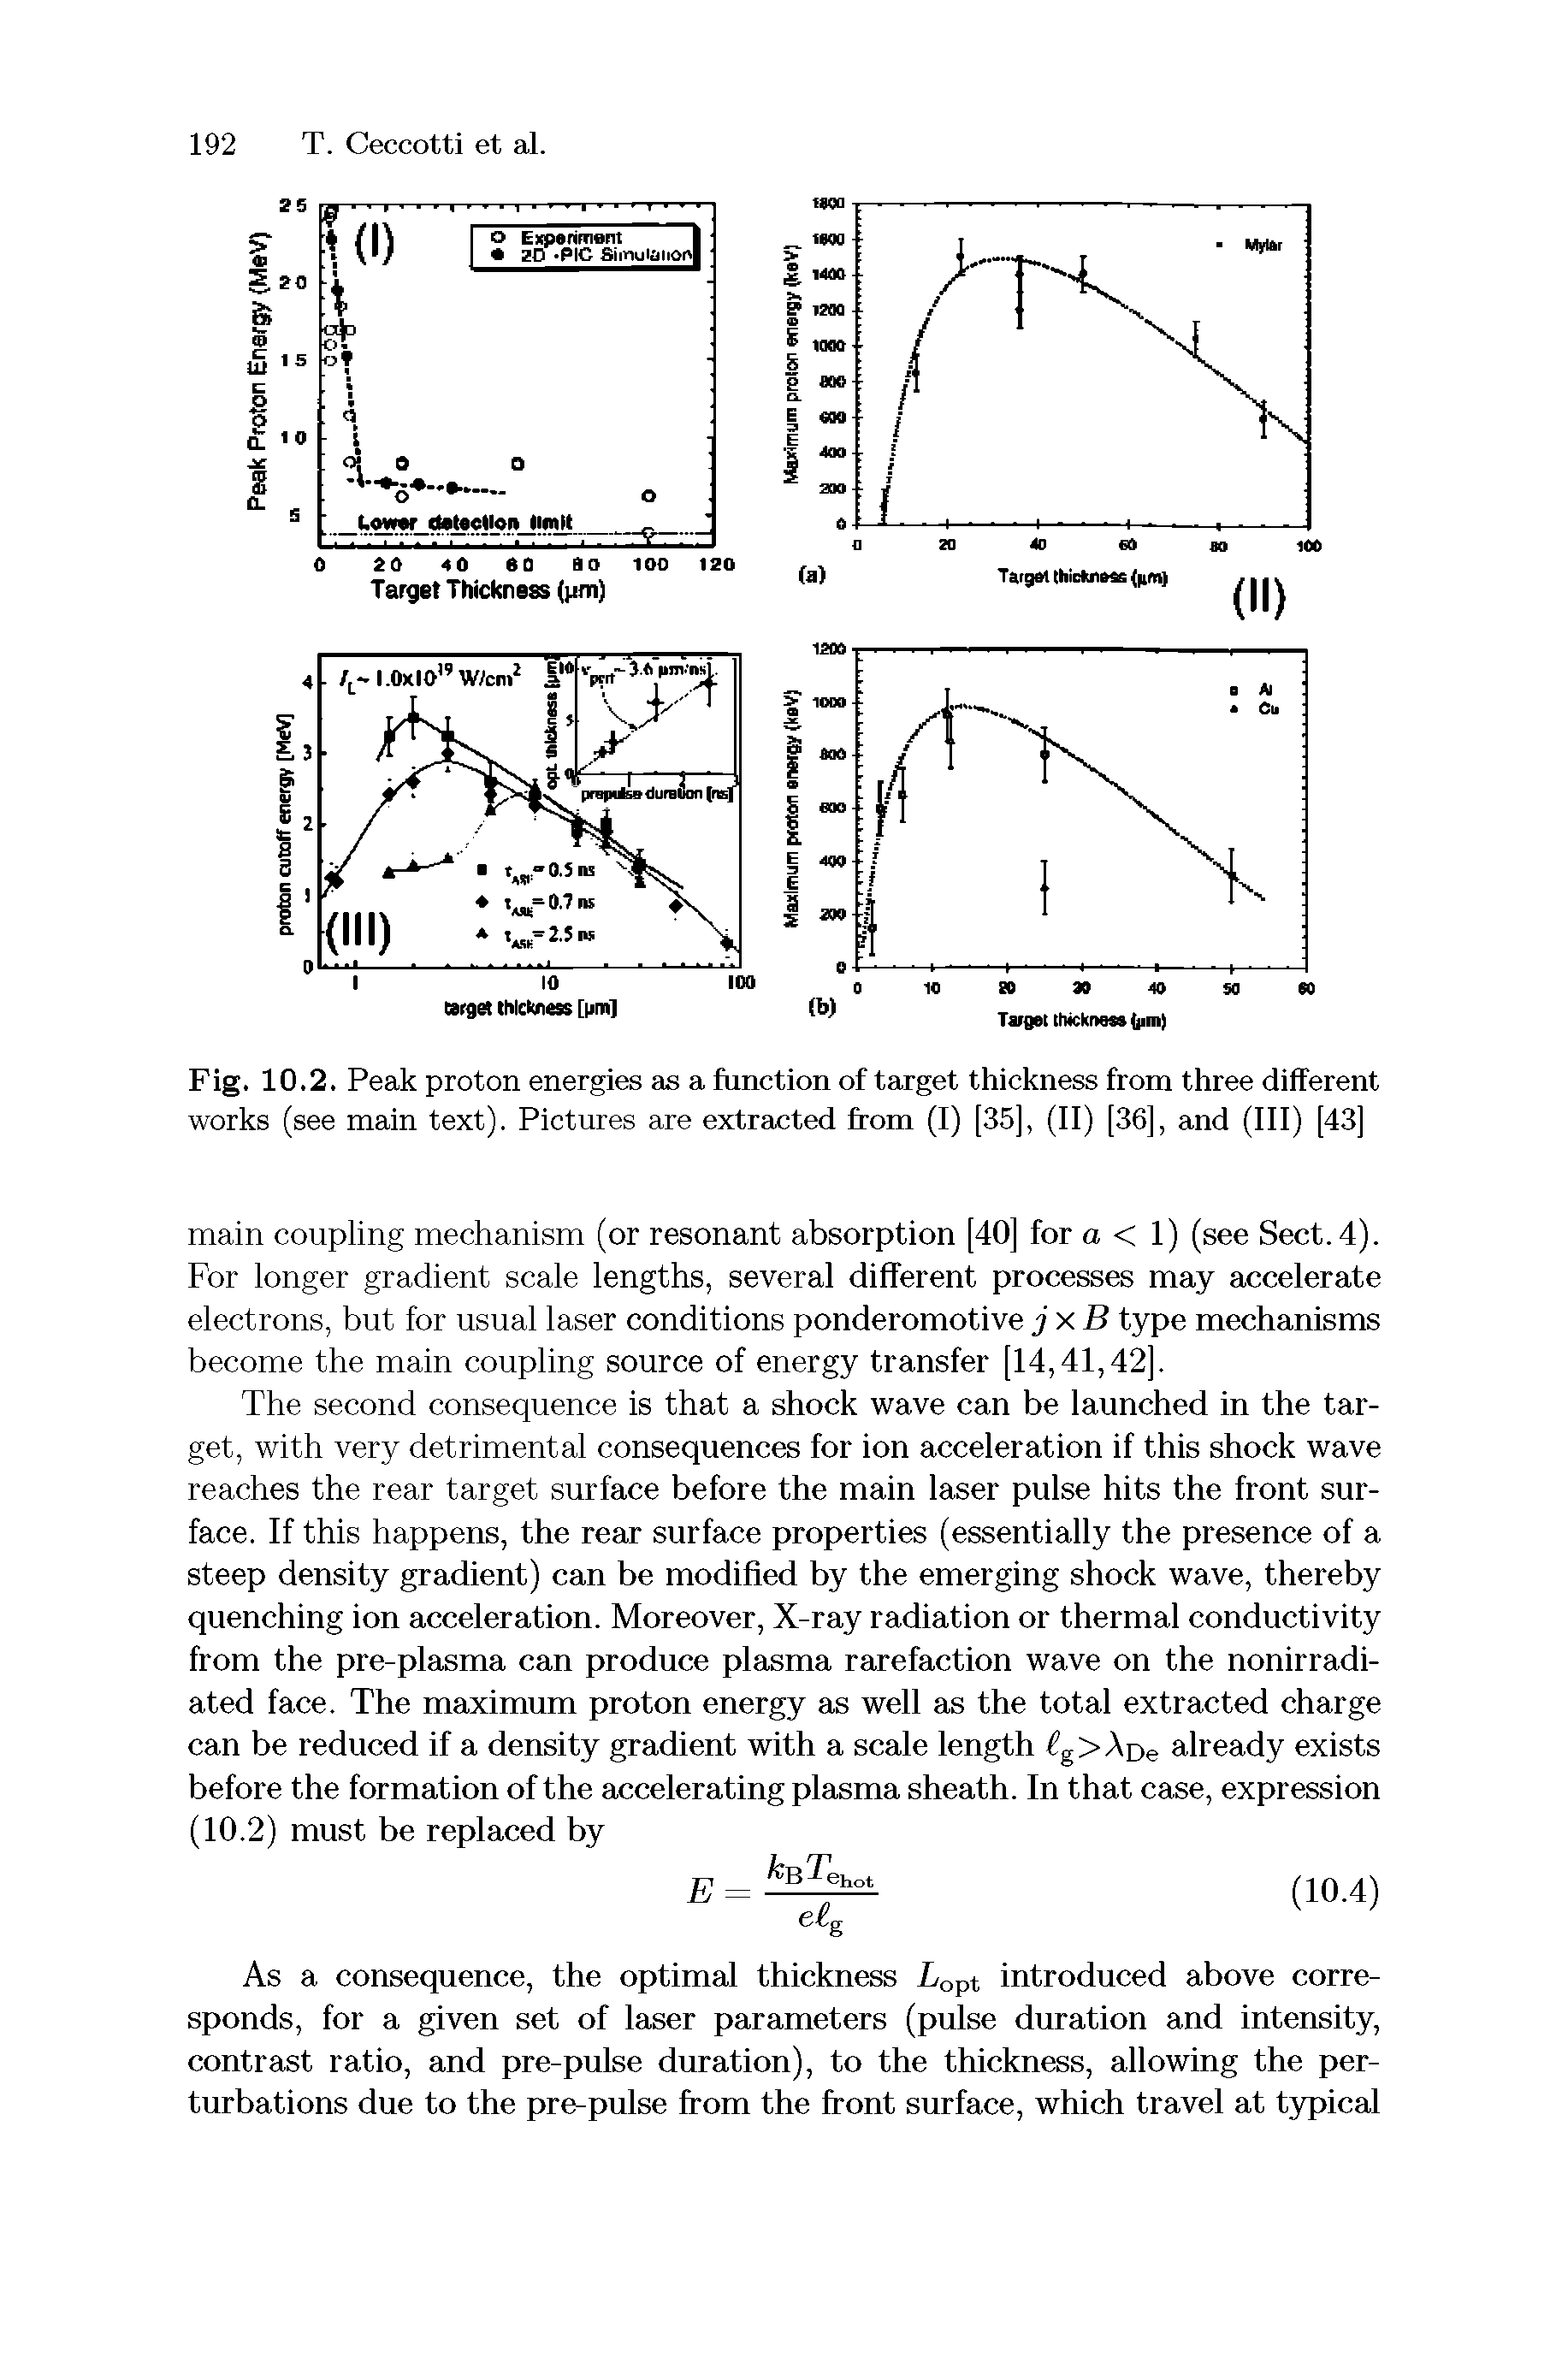 Fig. 10.2. Peak proton energies as a function of target thickness from three different works (see main text). Pictures are extracted from (I) [35], (II) [36], and (III) [43]...